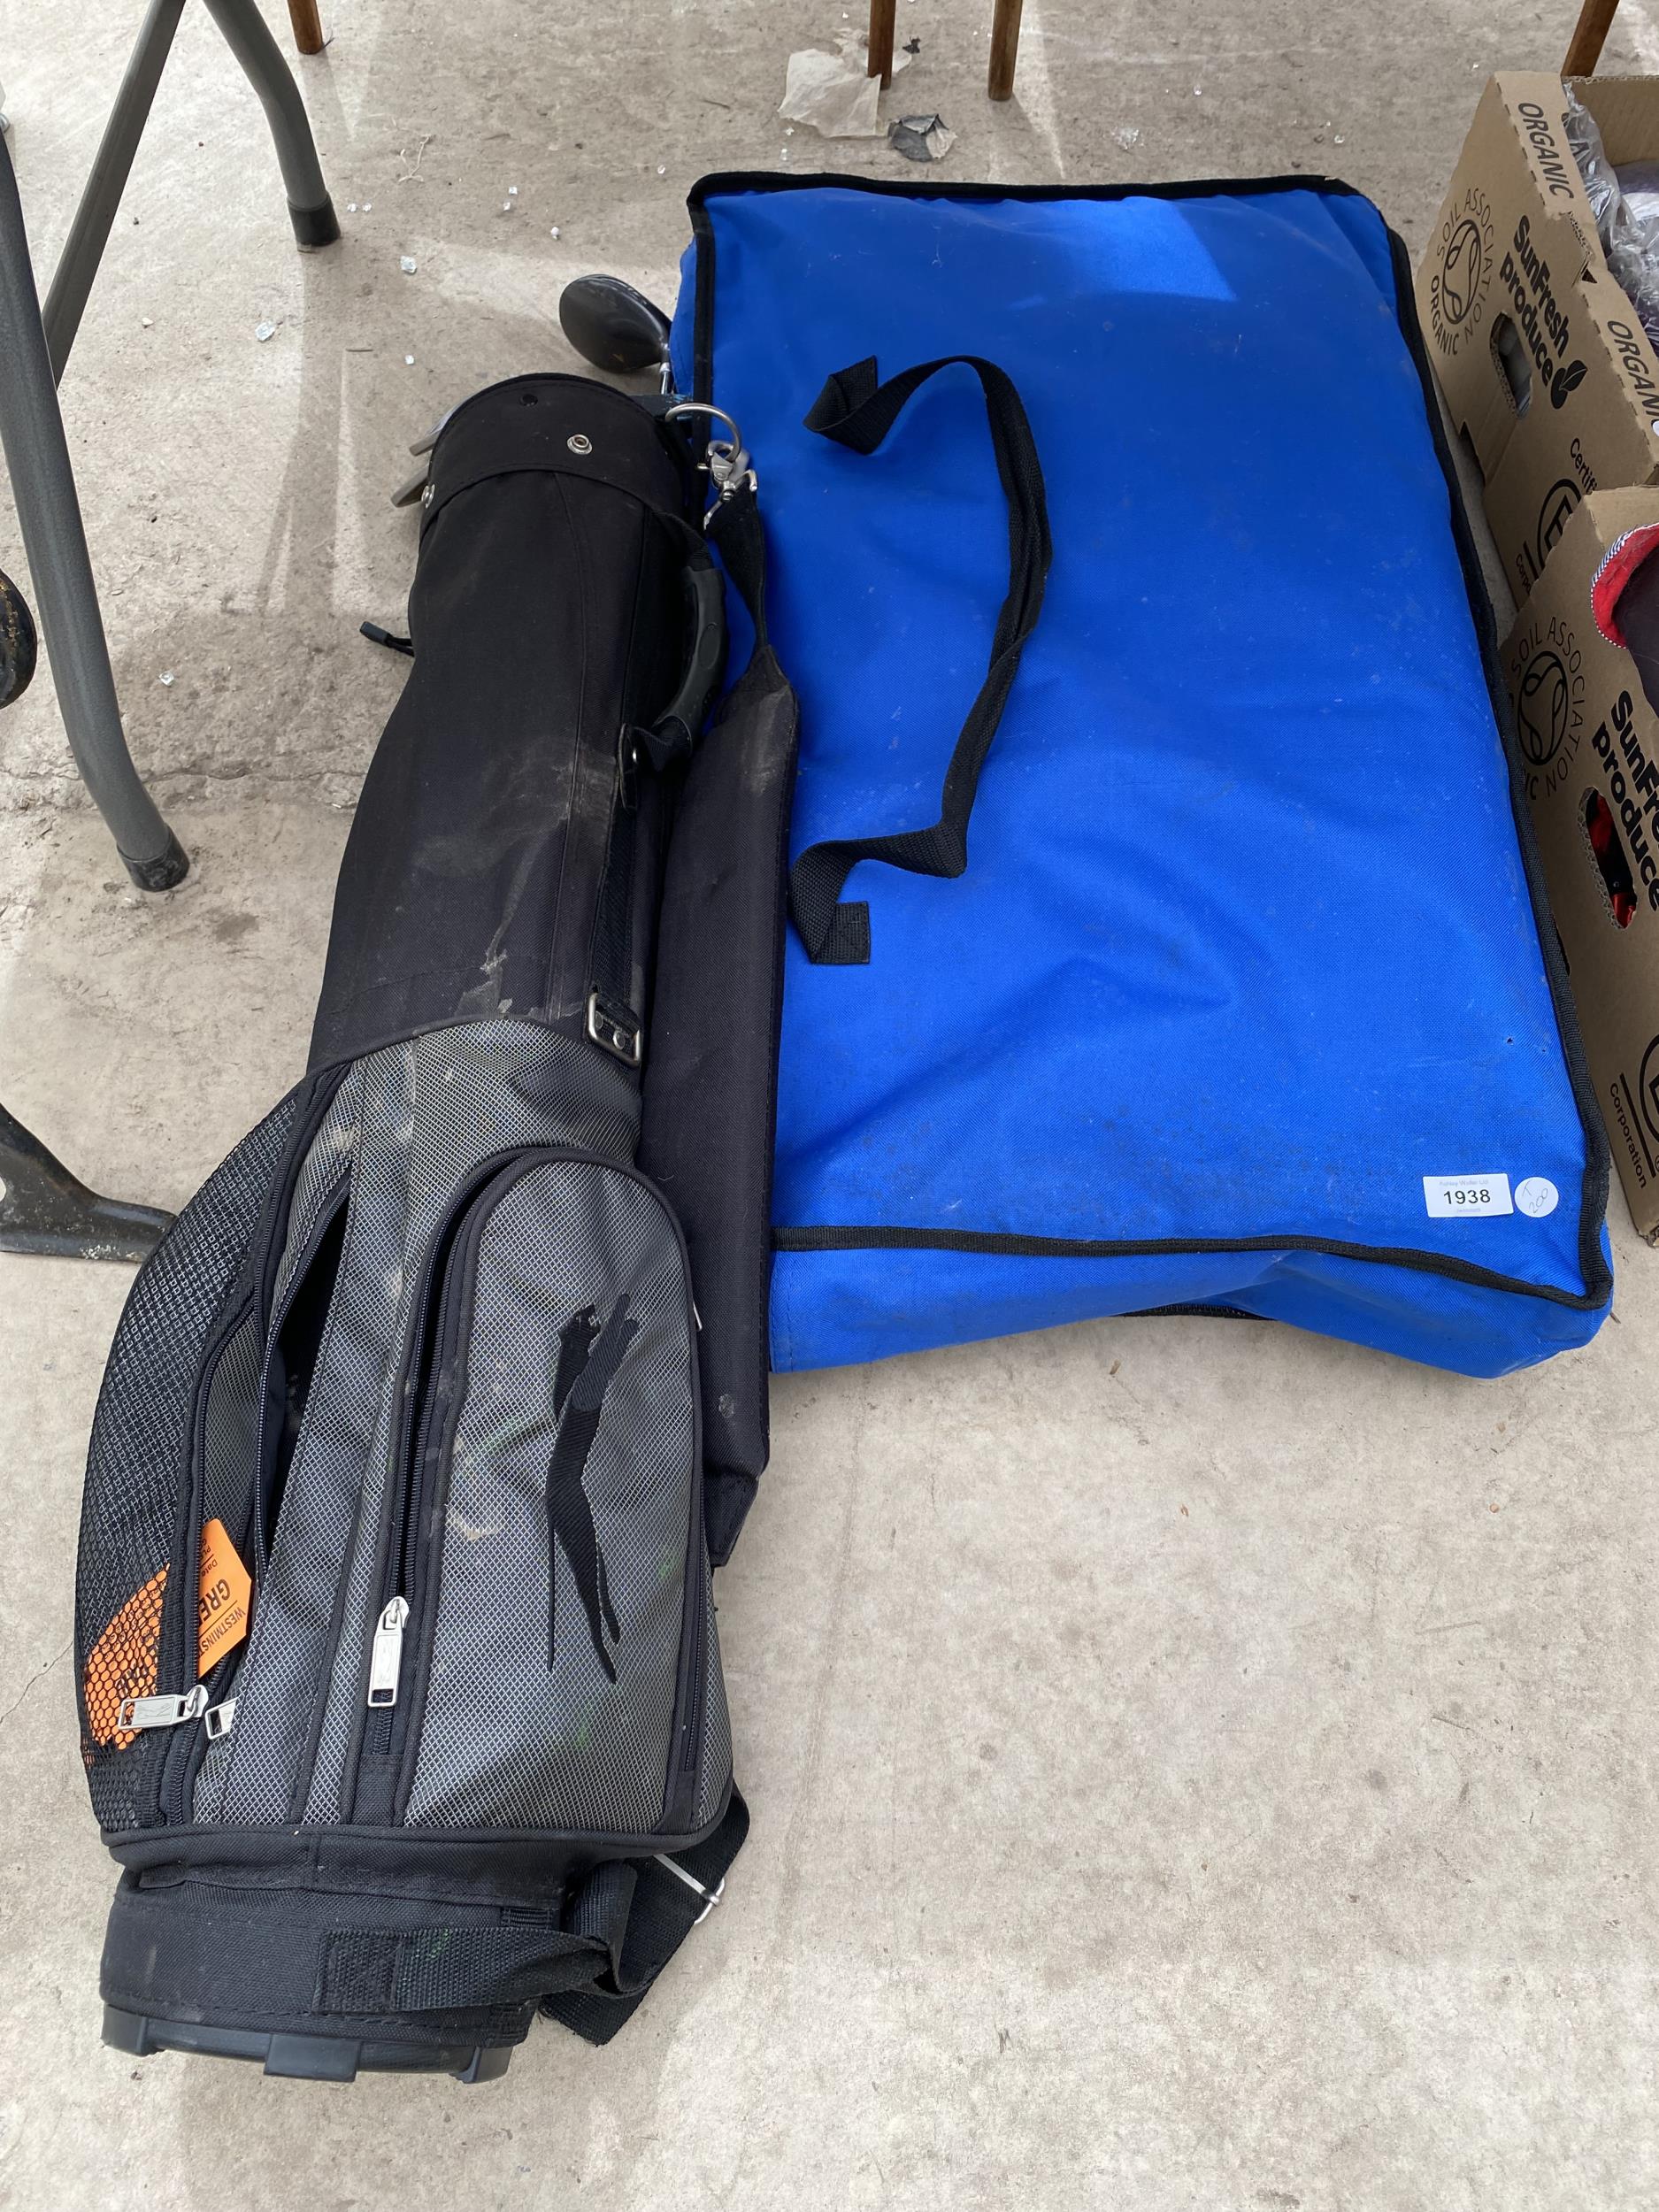 A SET OF GOLF CLUBS AND FOLDING TABLE IN BAG